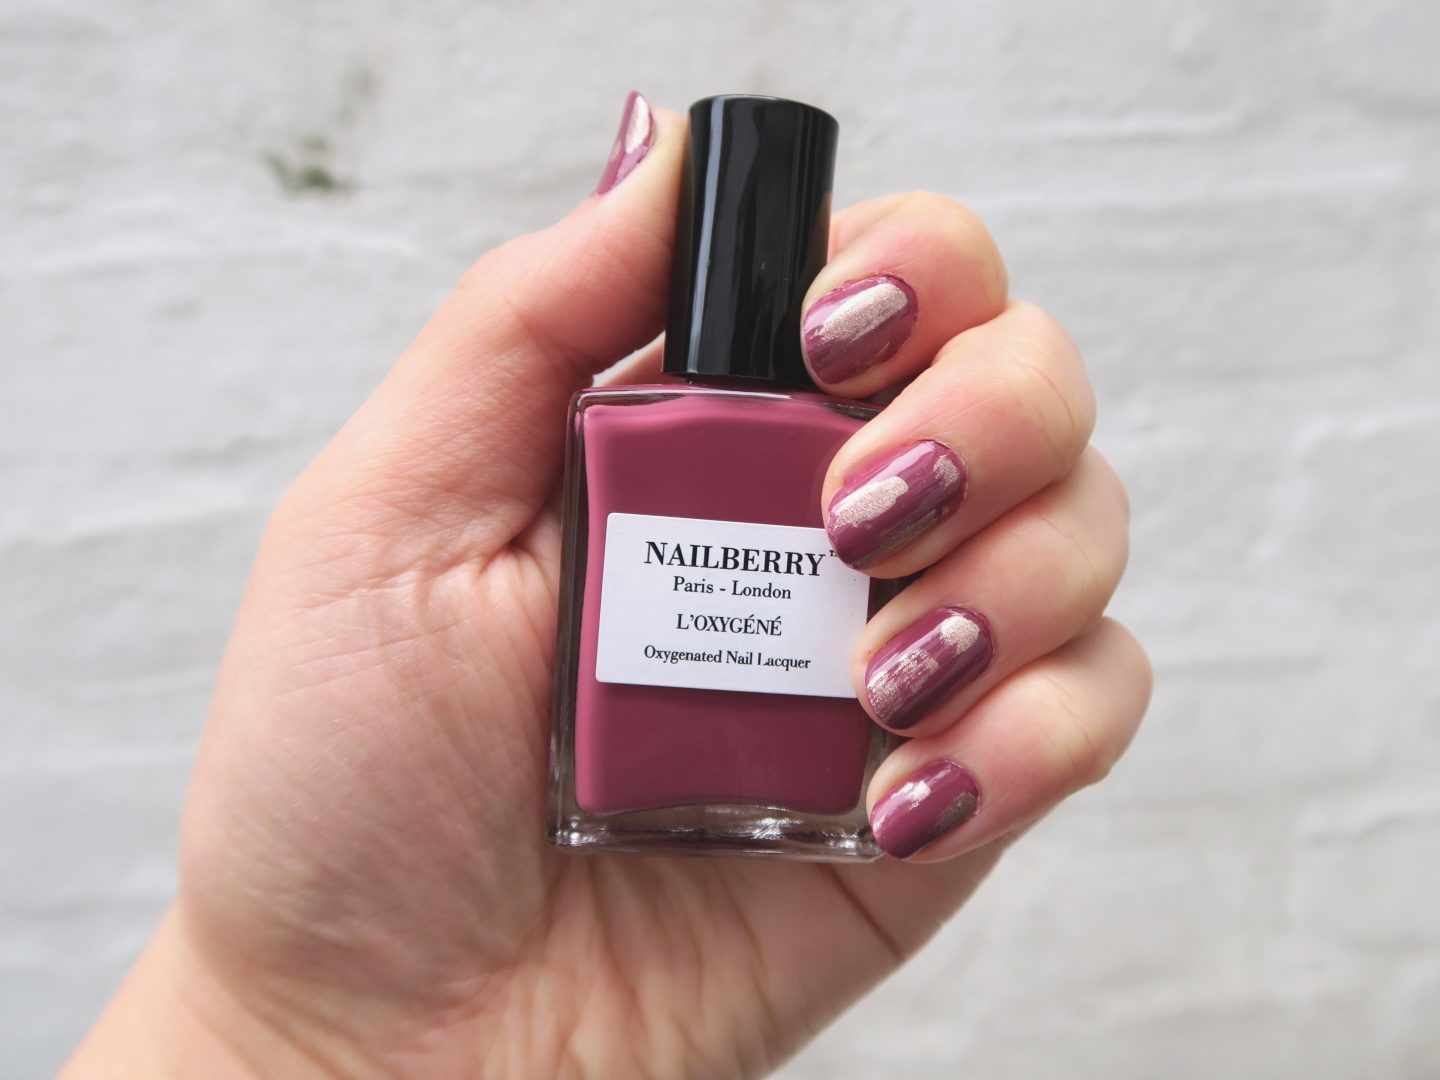 Nailberry Nail Polish in Raspberry | Curiously Conscious